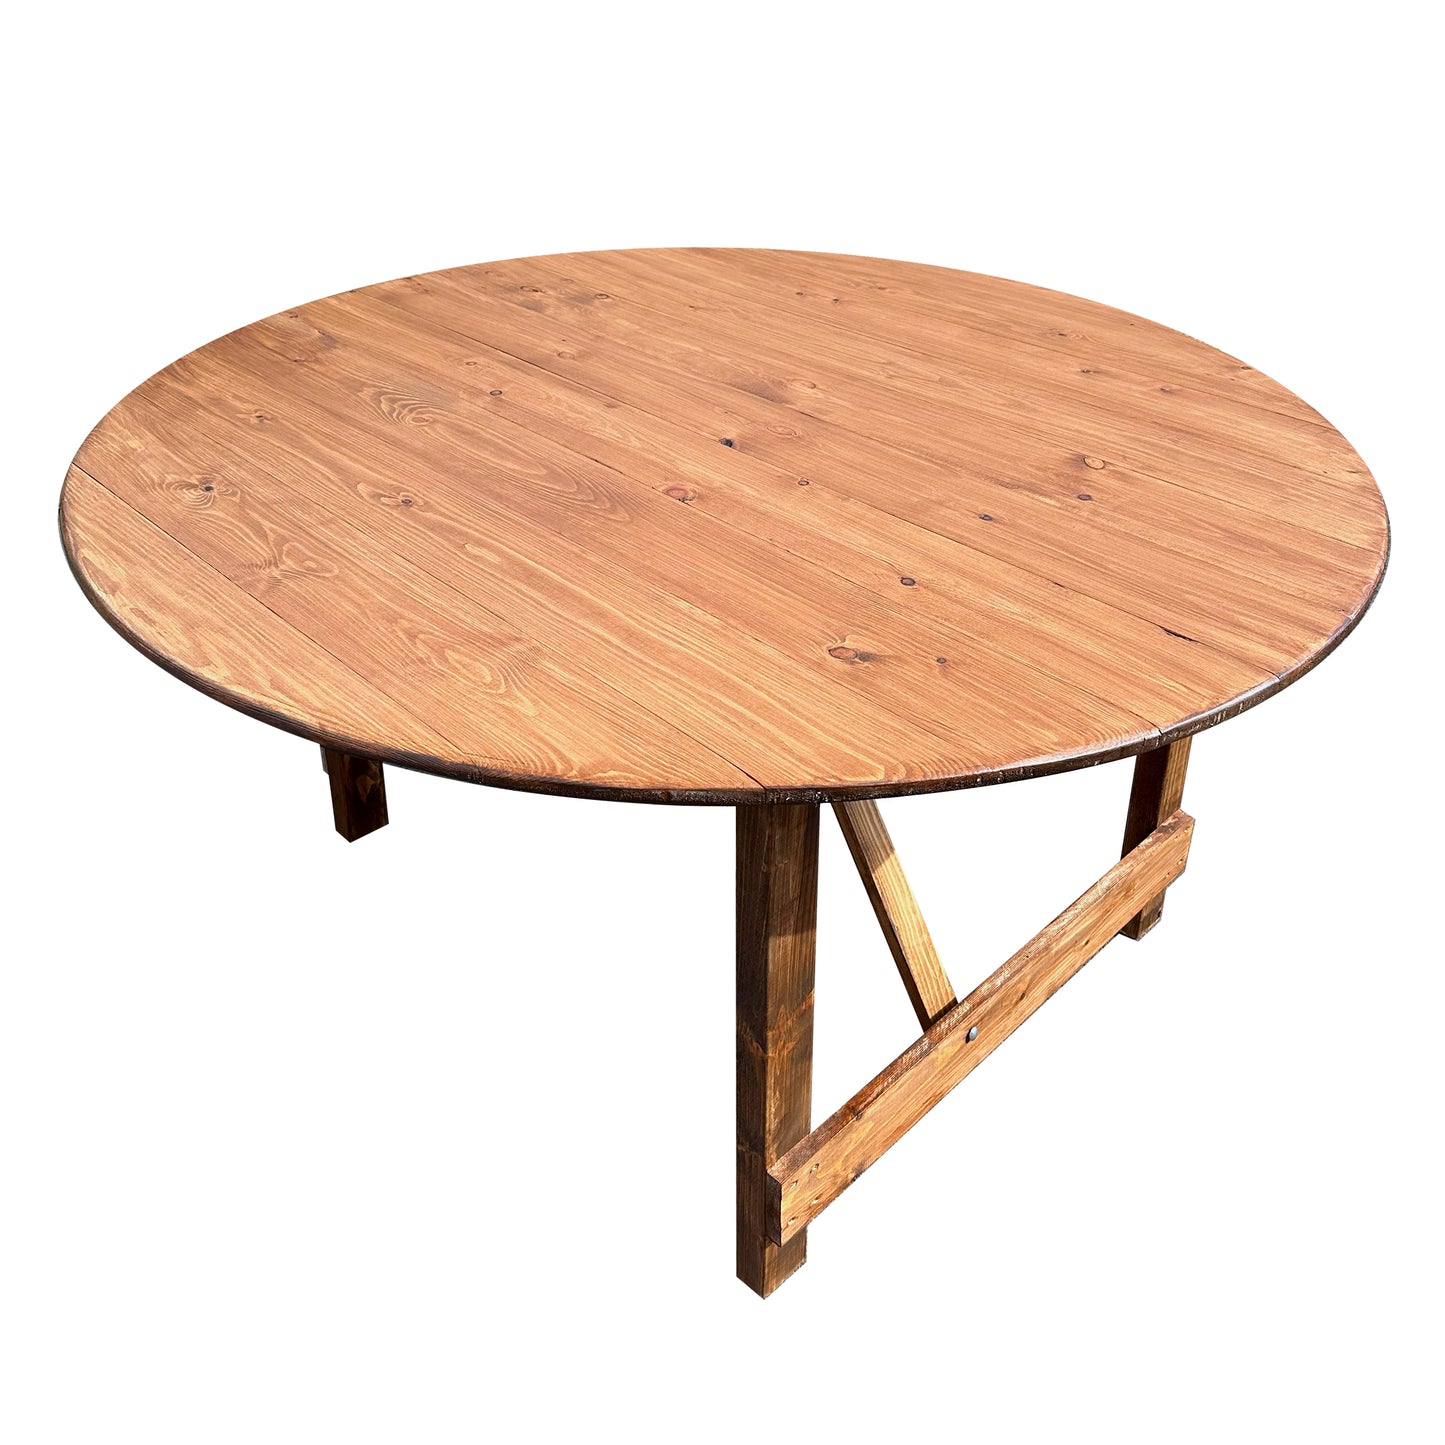 1. Indoor Round Folding Rustic-style Trestle Table